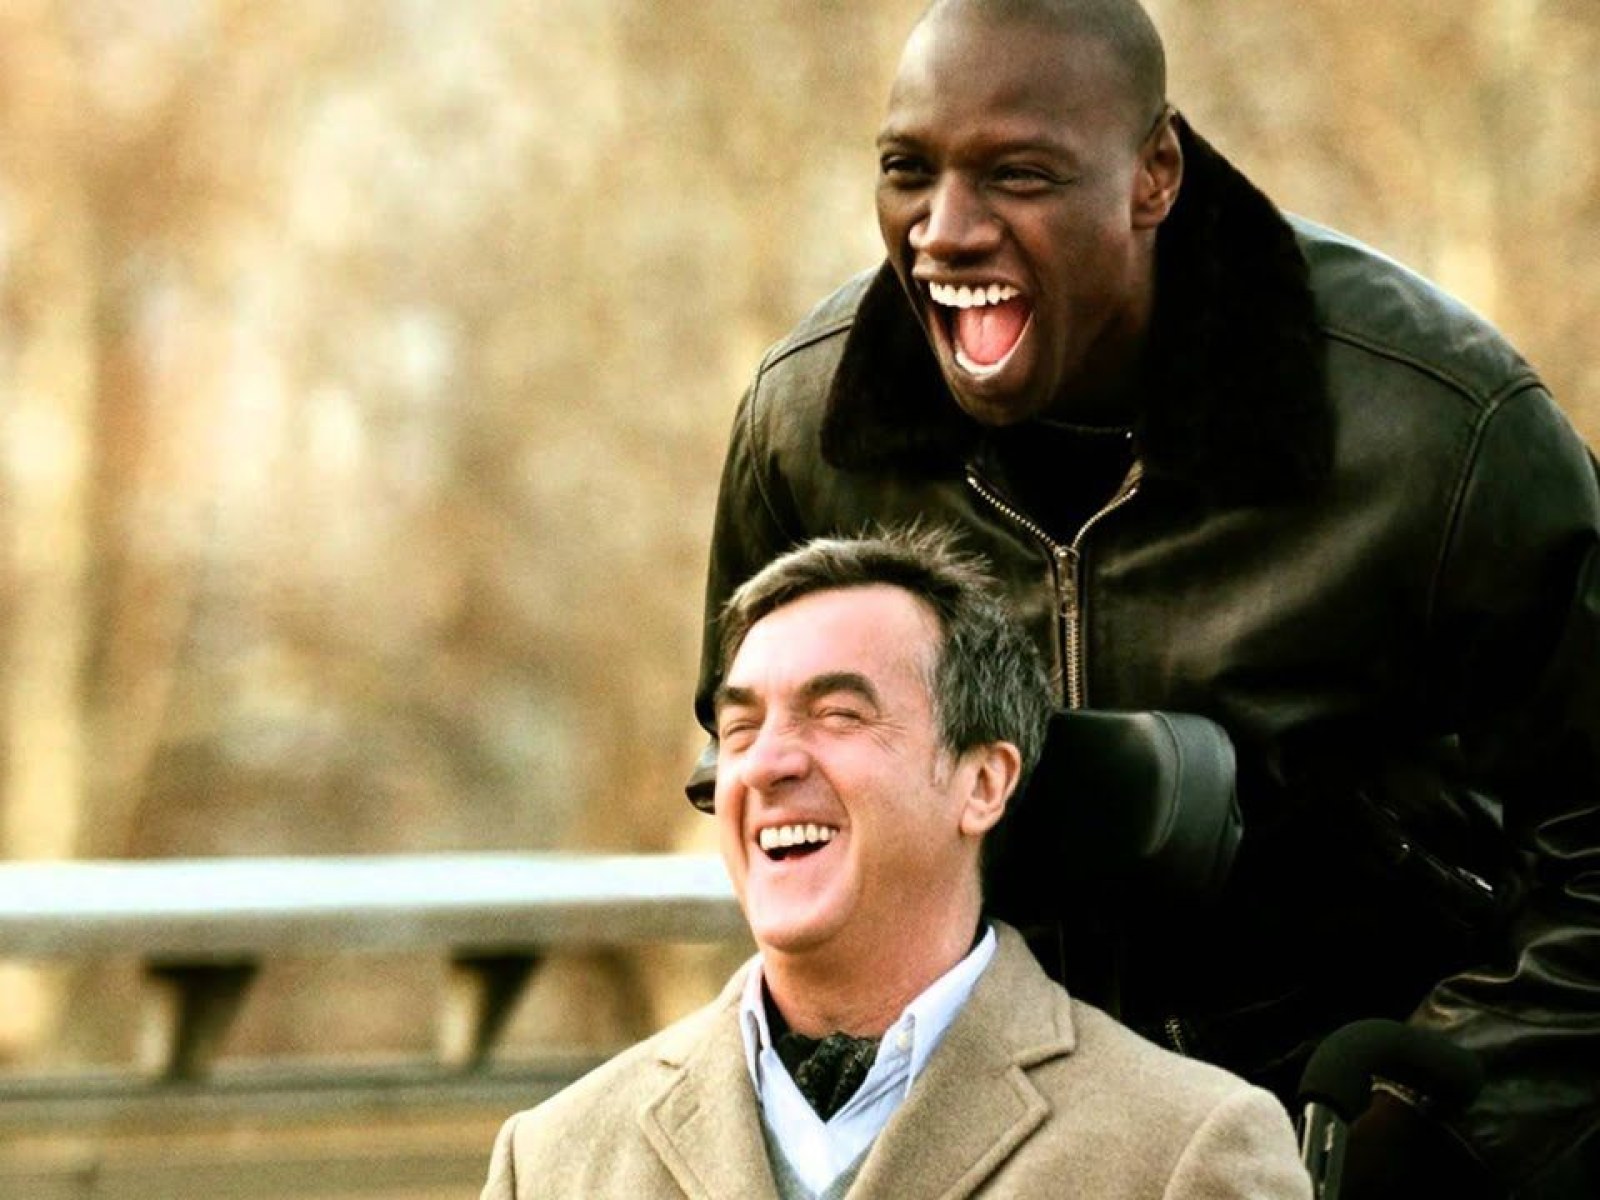 The Upside' True Story: Kevin Hart and Bryan Cranston Replace the